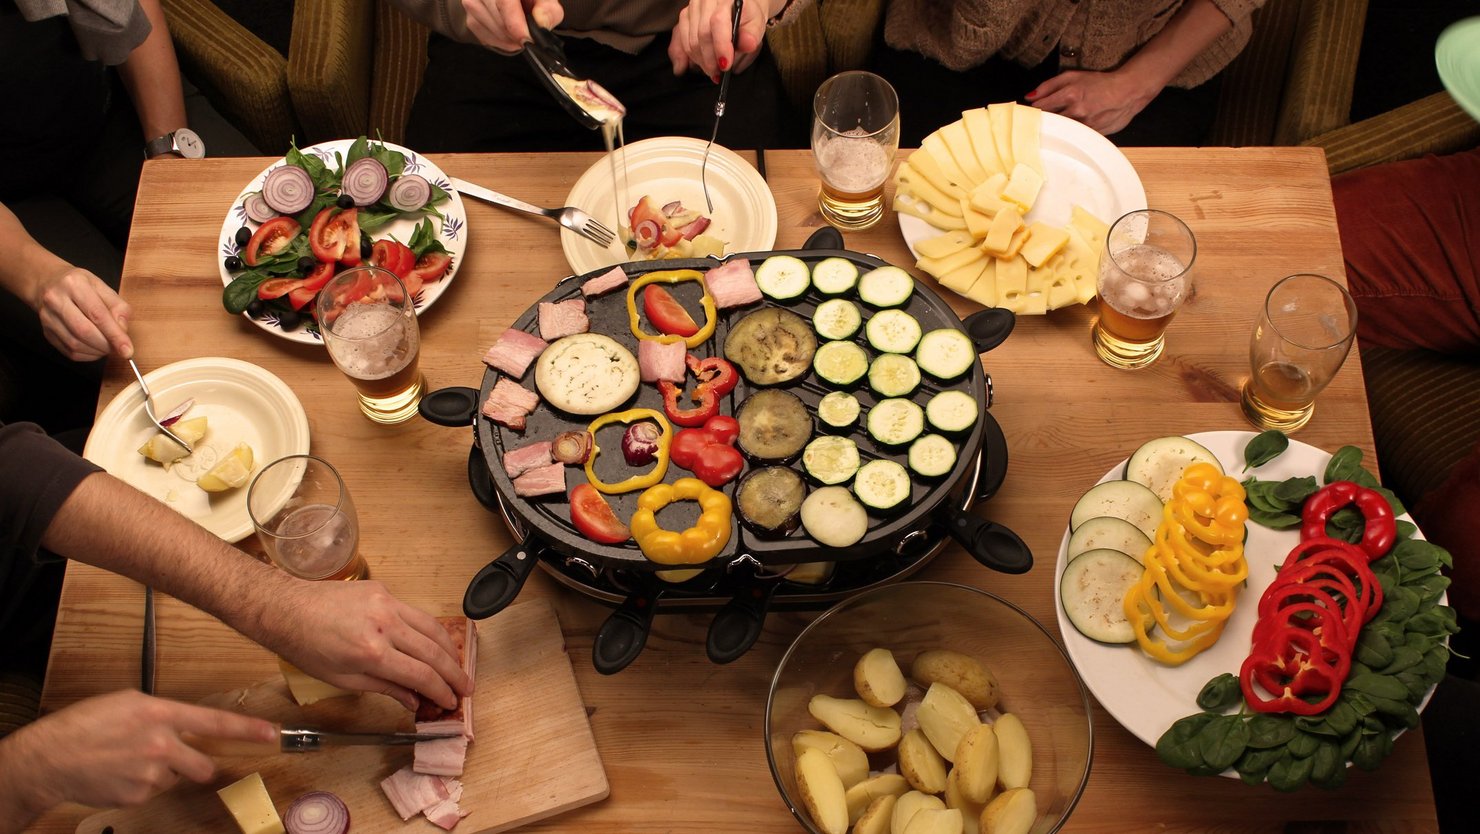 [Translate to NO (Norway):] Table with raclette oven and dishes with potatoes, vegetables and cheese